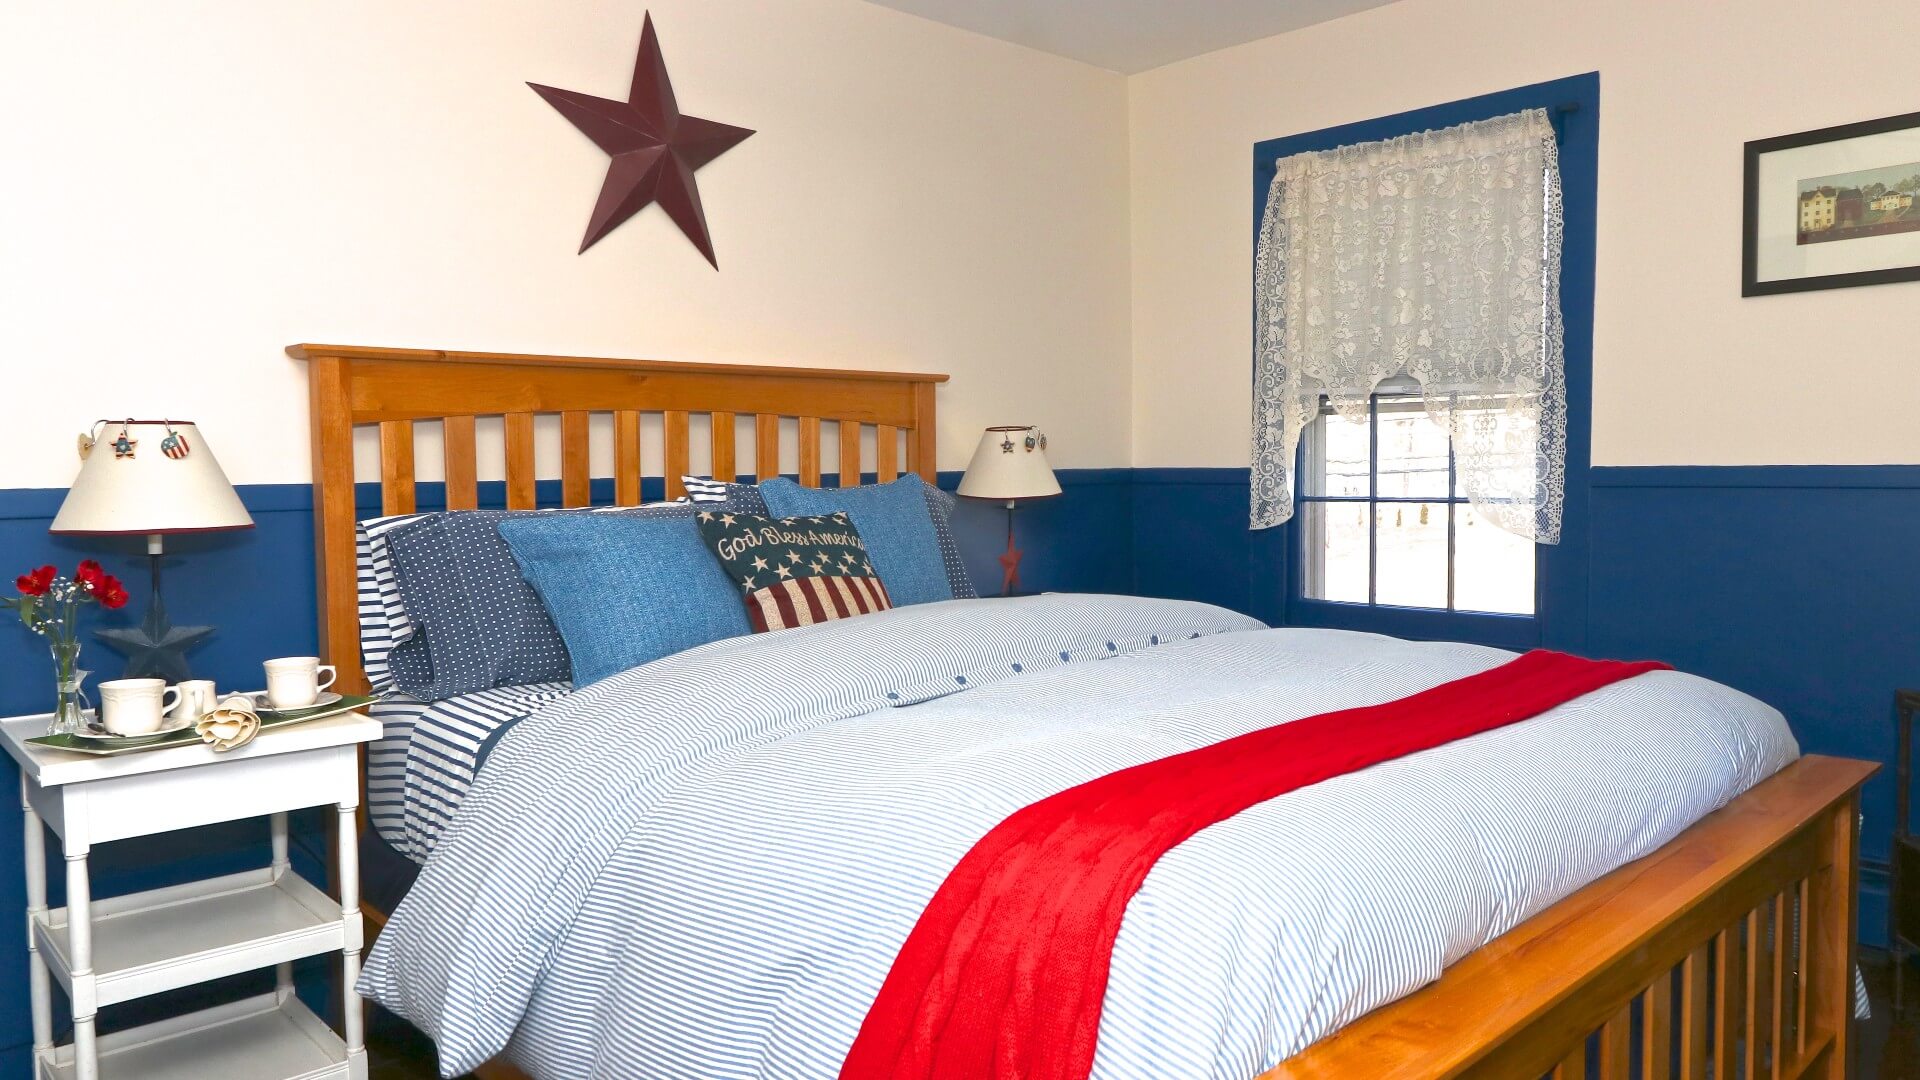 Red, white and blue themed bedroom with bed, white side tables and purple star decoration